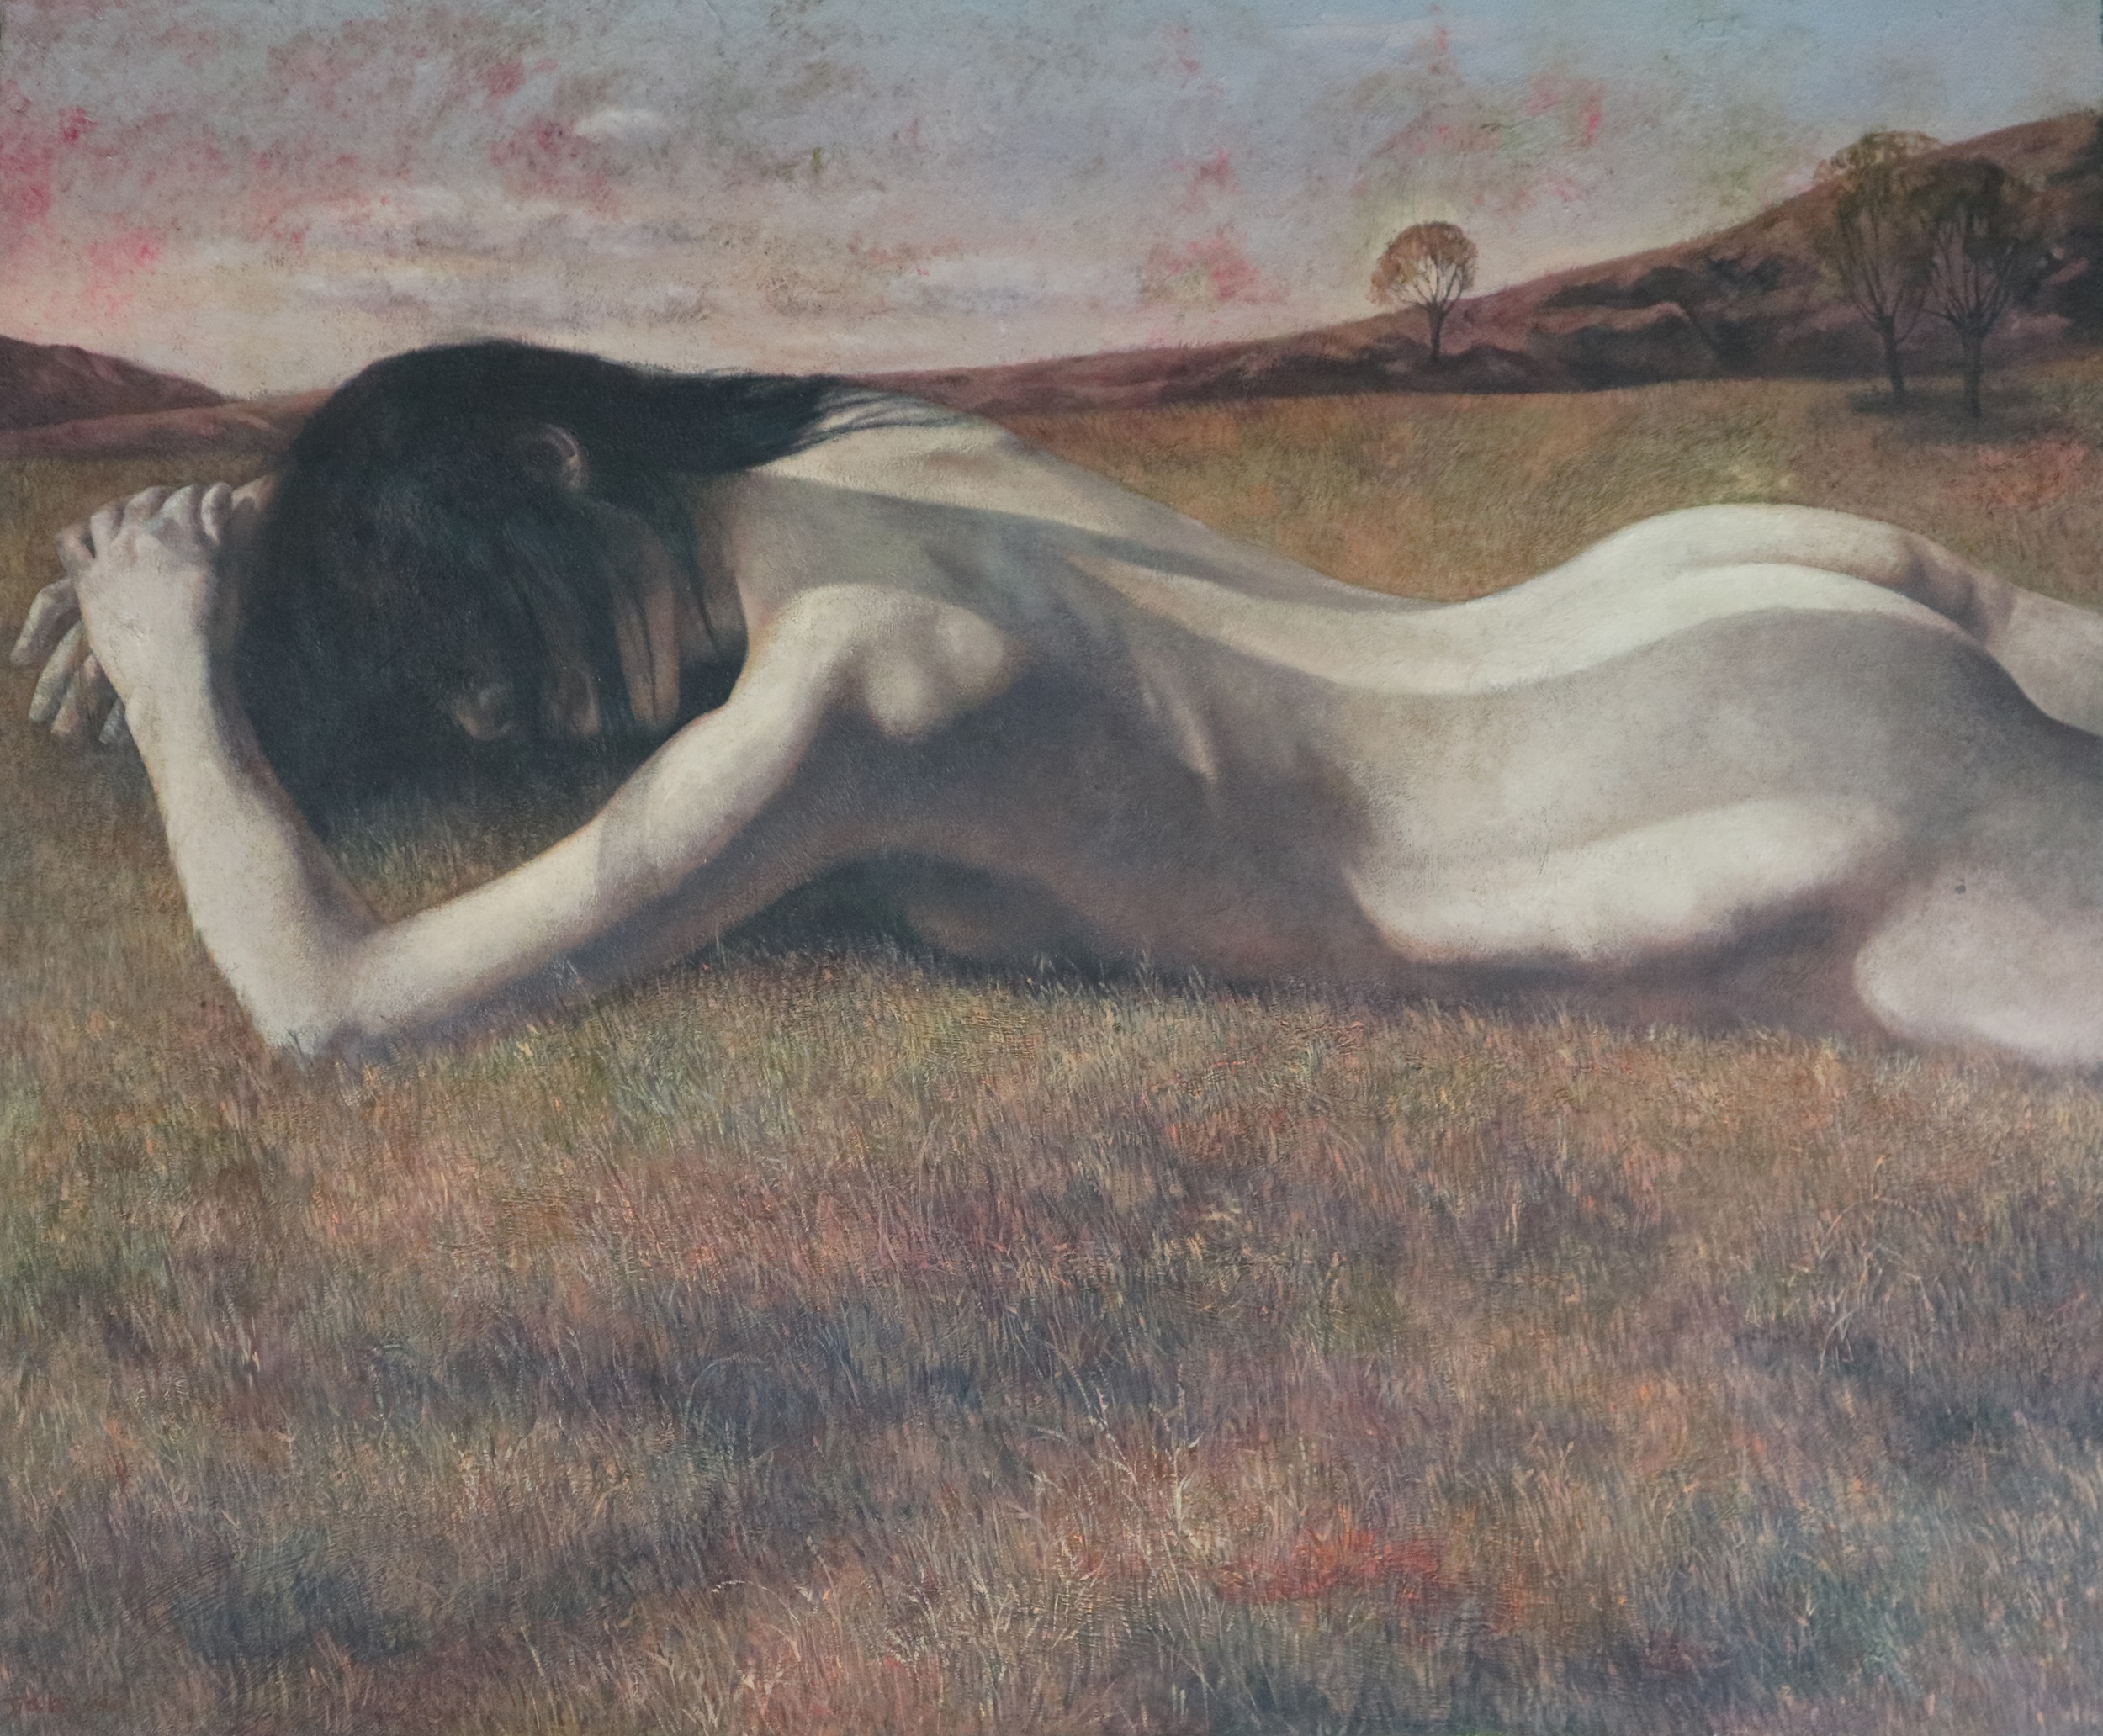 Jia Ke (Chinese 20th-21st Century) Sleeping nude Lying in a Field, signed Jia Ke(?), and dated